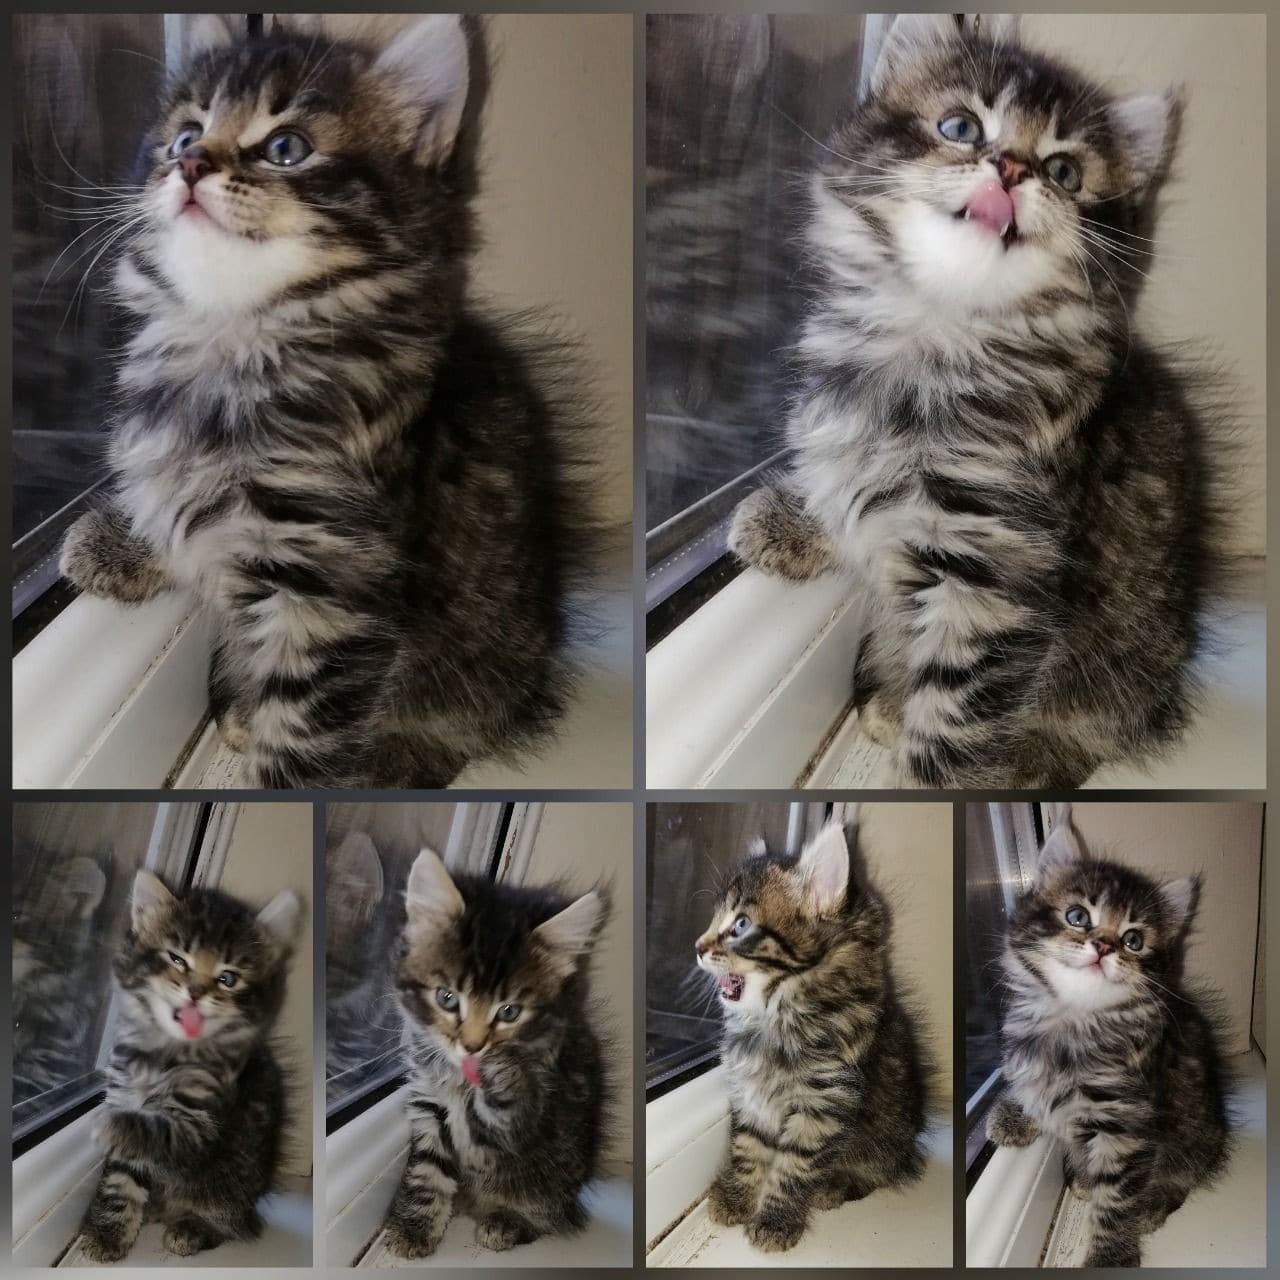 20+ Maine Coon Kittens For Sale $450 Nj